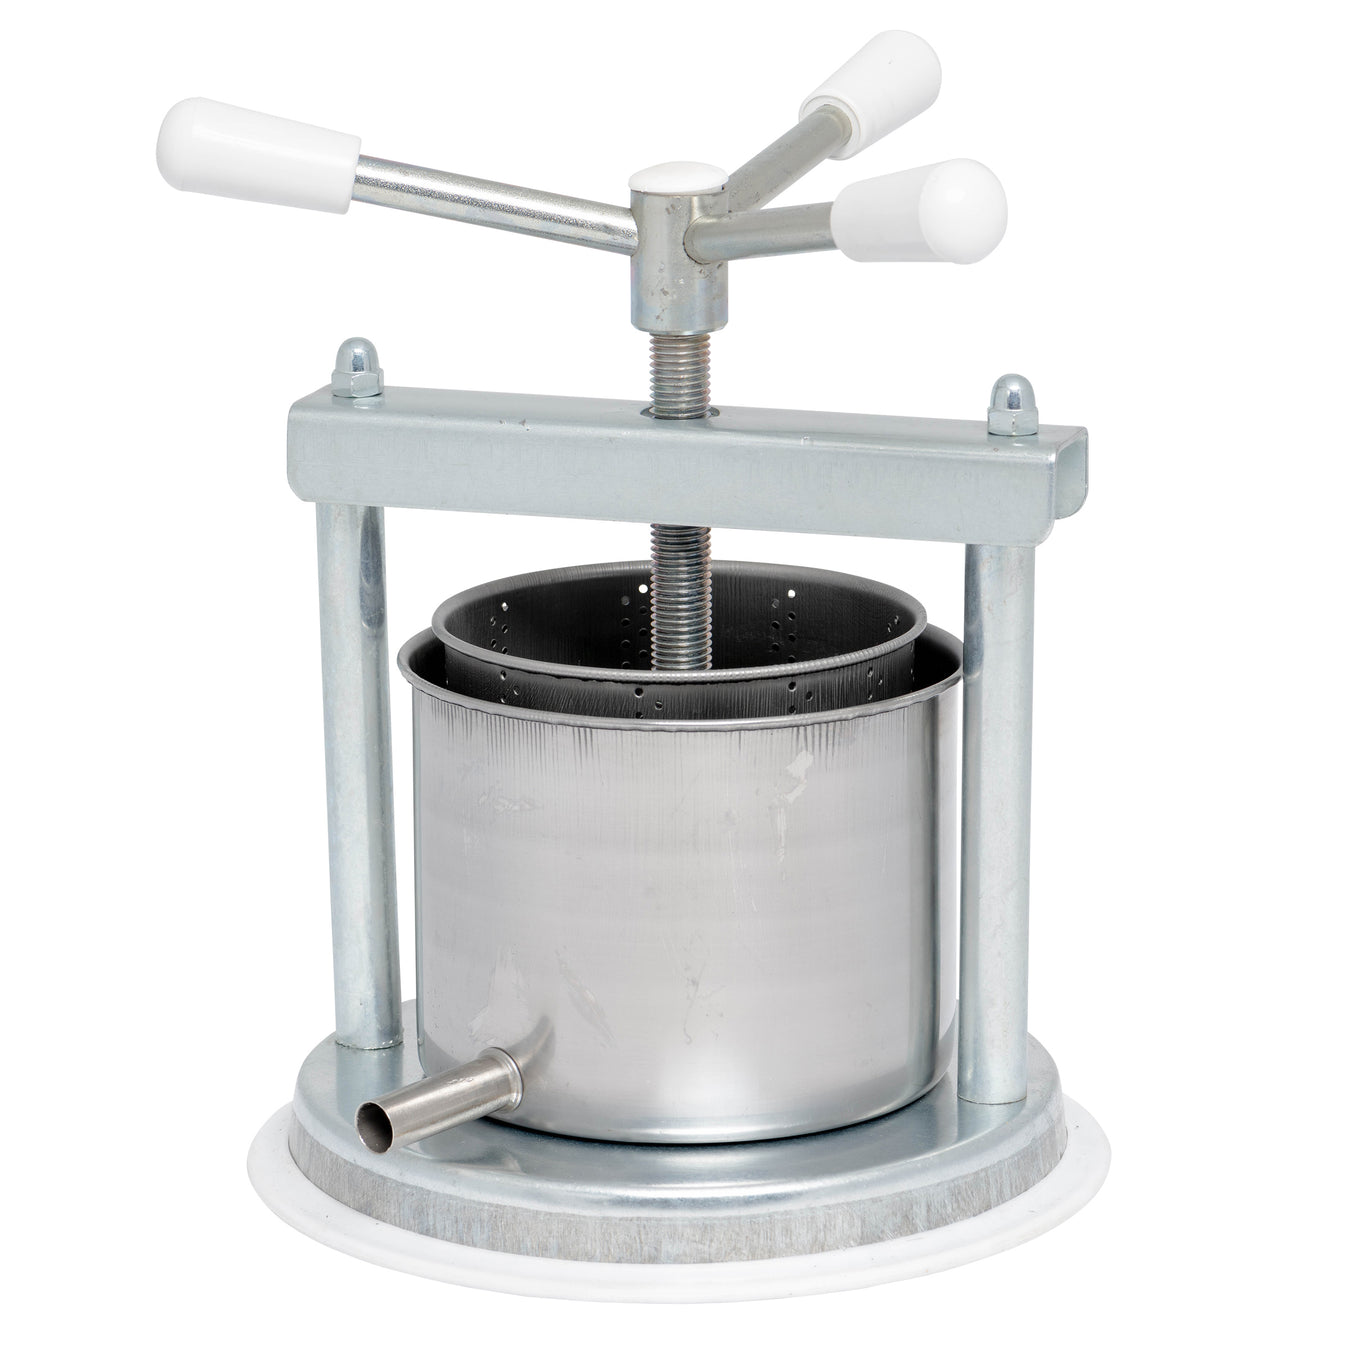 Small Professional Galvanized Vegetable / Fruit Press 5" - 2 Litre Torchietto Made in Italy for Pressing Fruits, Vegetables, Berries and Tinctures USA